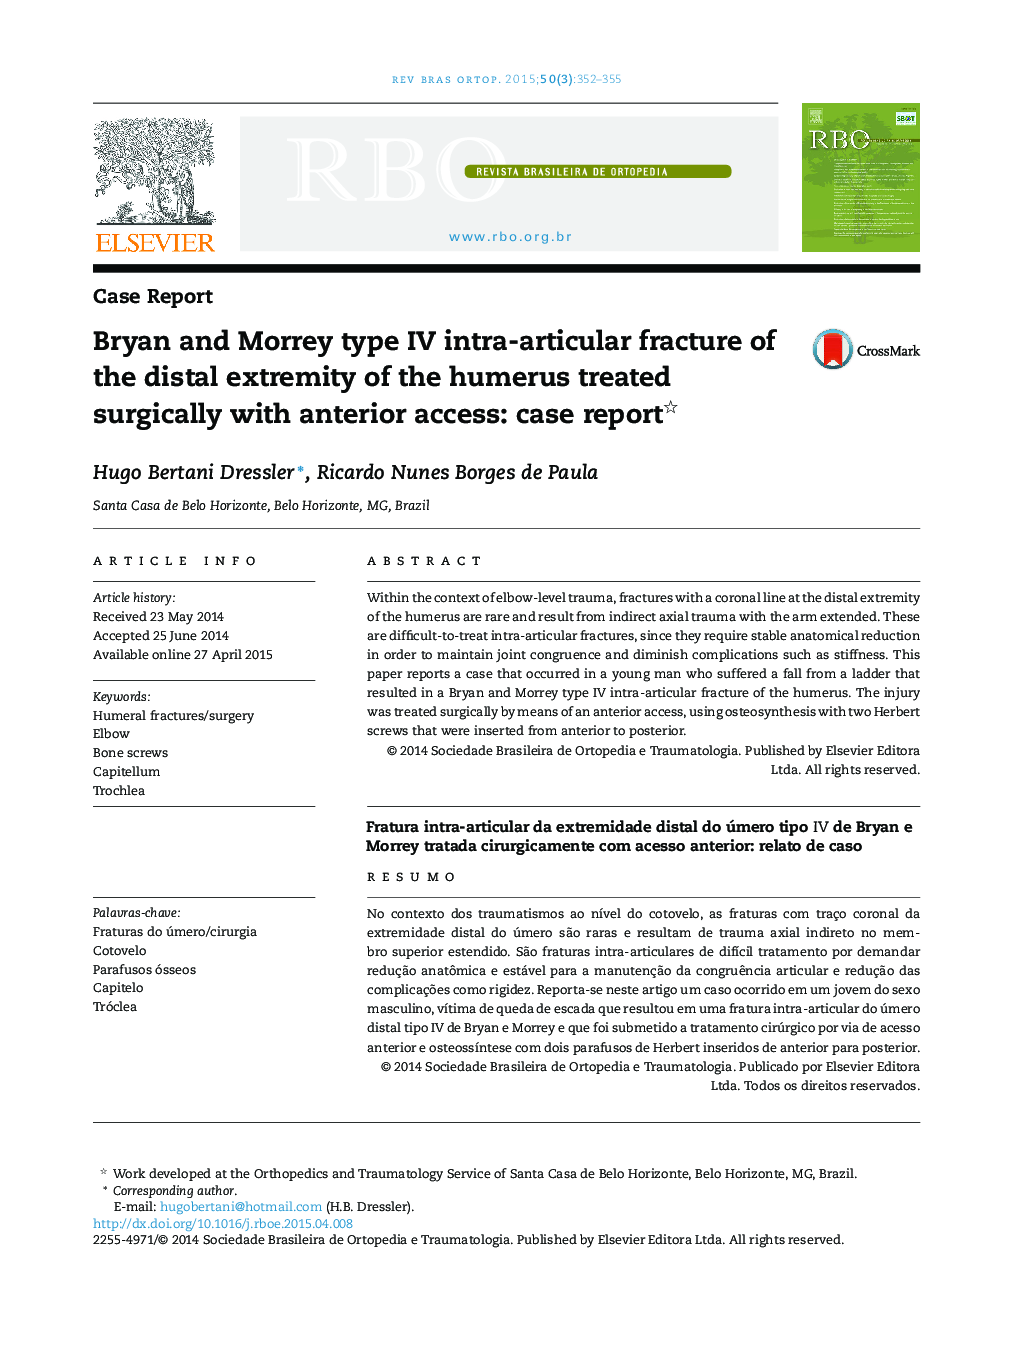 Bryan and Morrey type IV intra-articular fracture of the distal extremity of the humerus treated surgically with anterior access: case report 